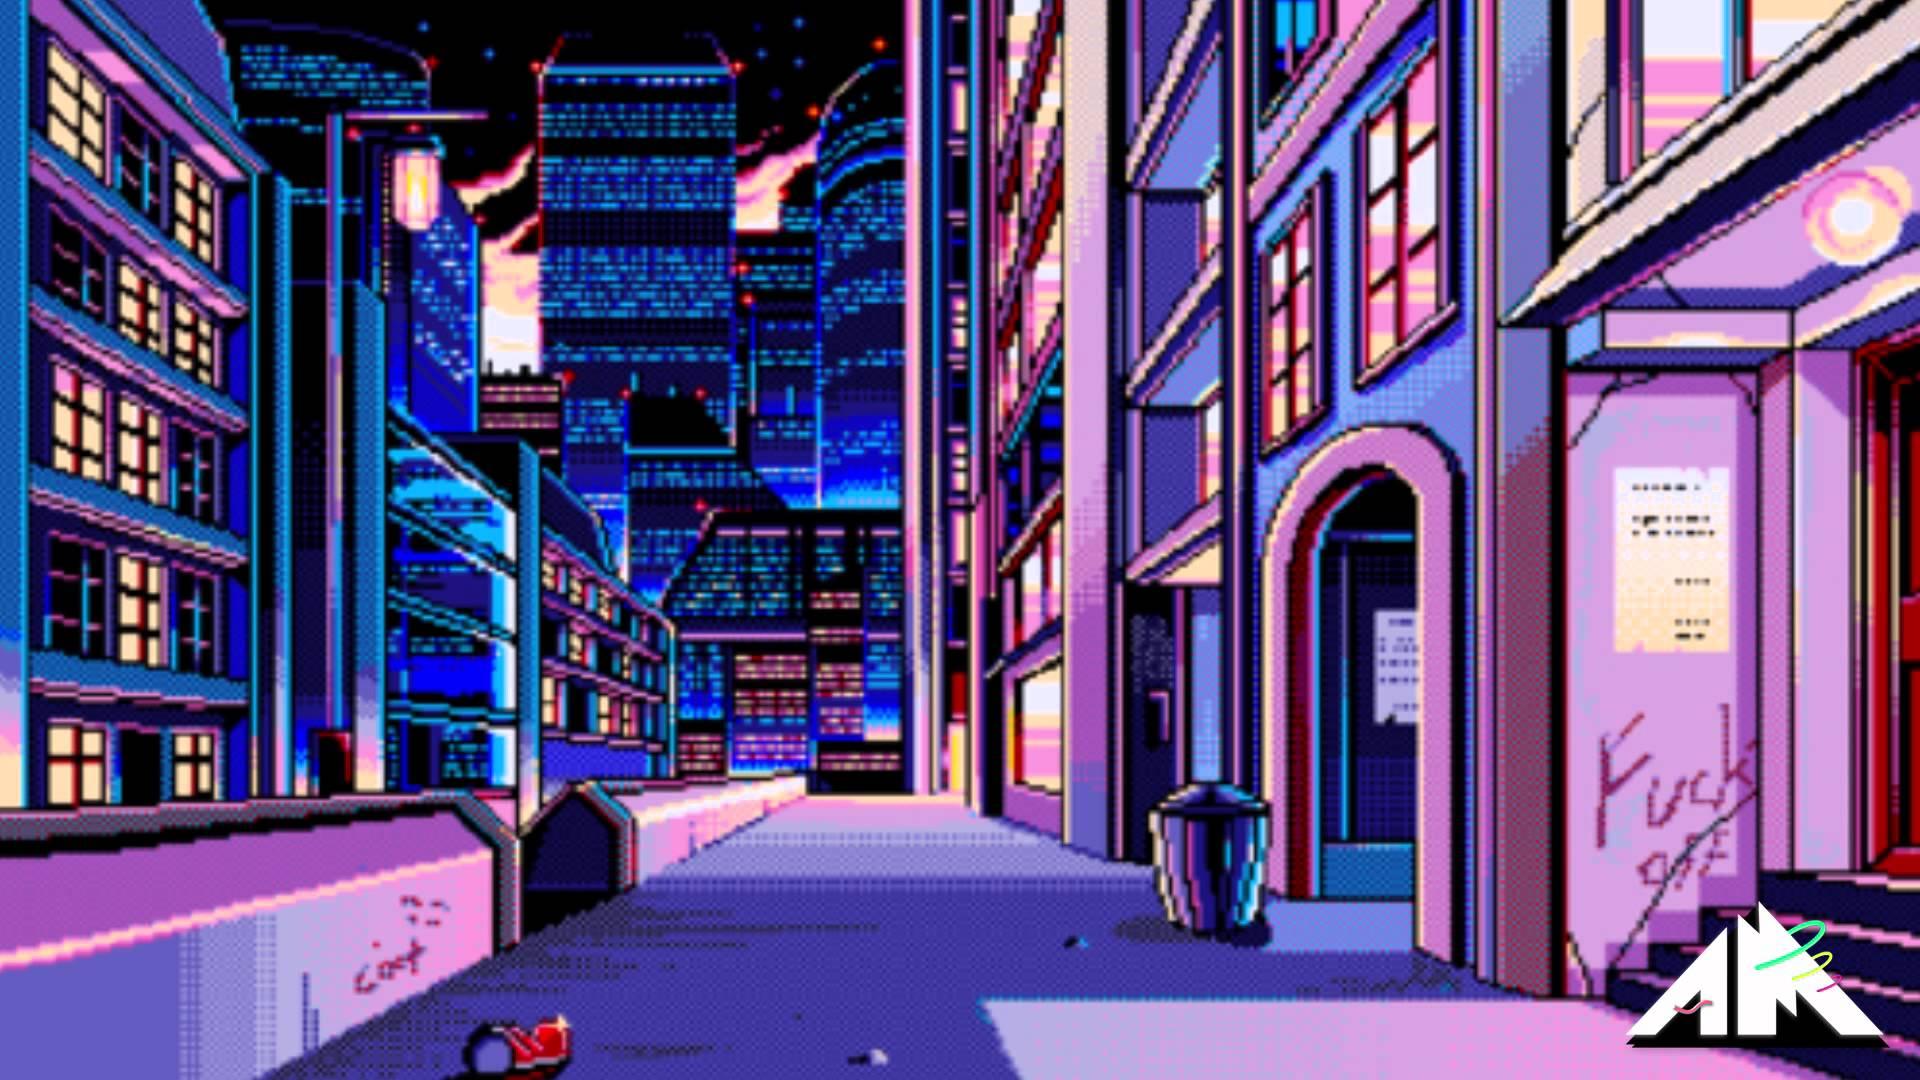 Free Aesthetic Vaporwave Wallpaper HD Resolution at Cool